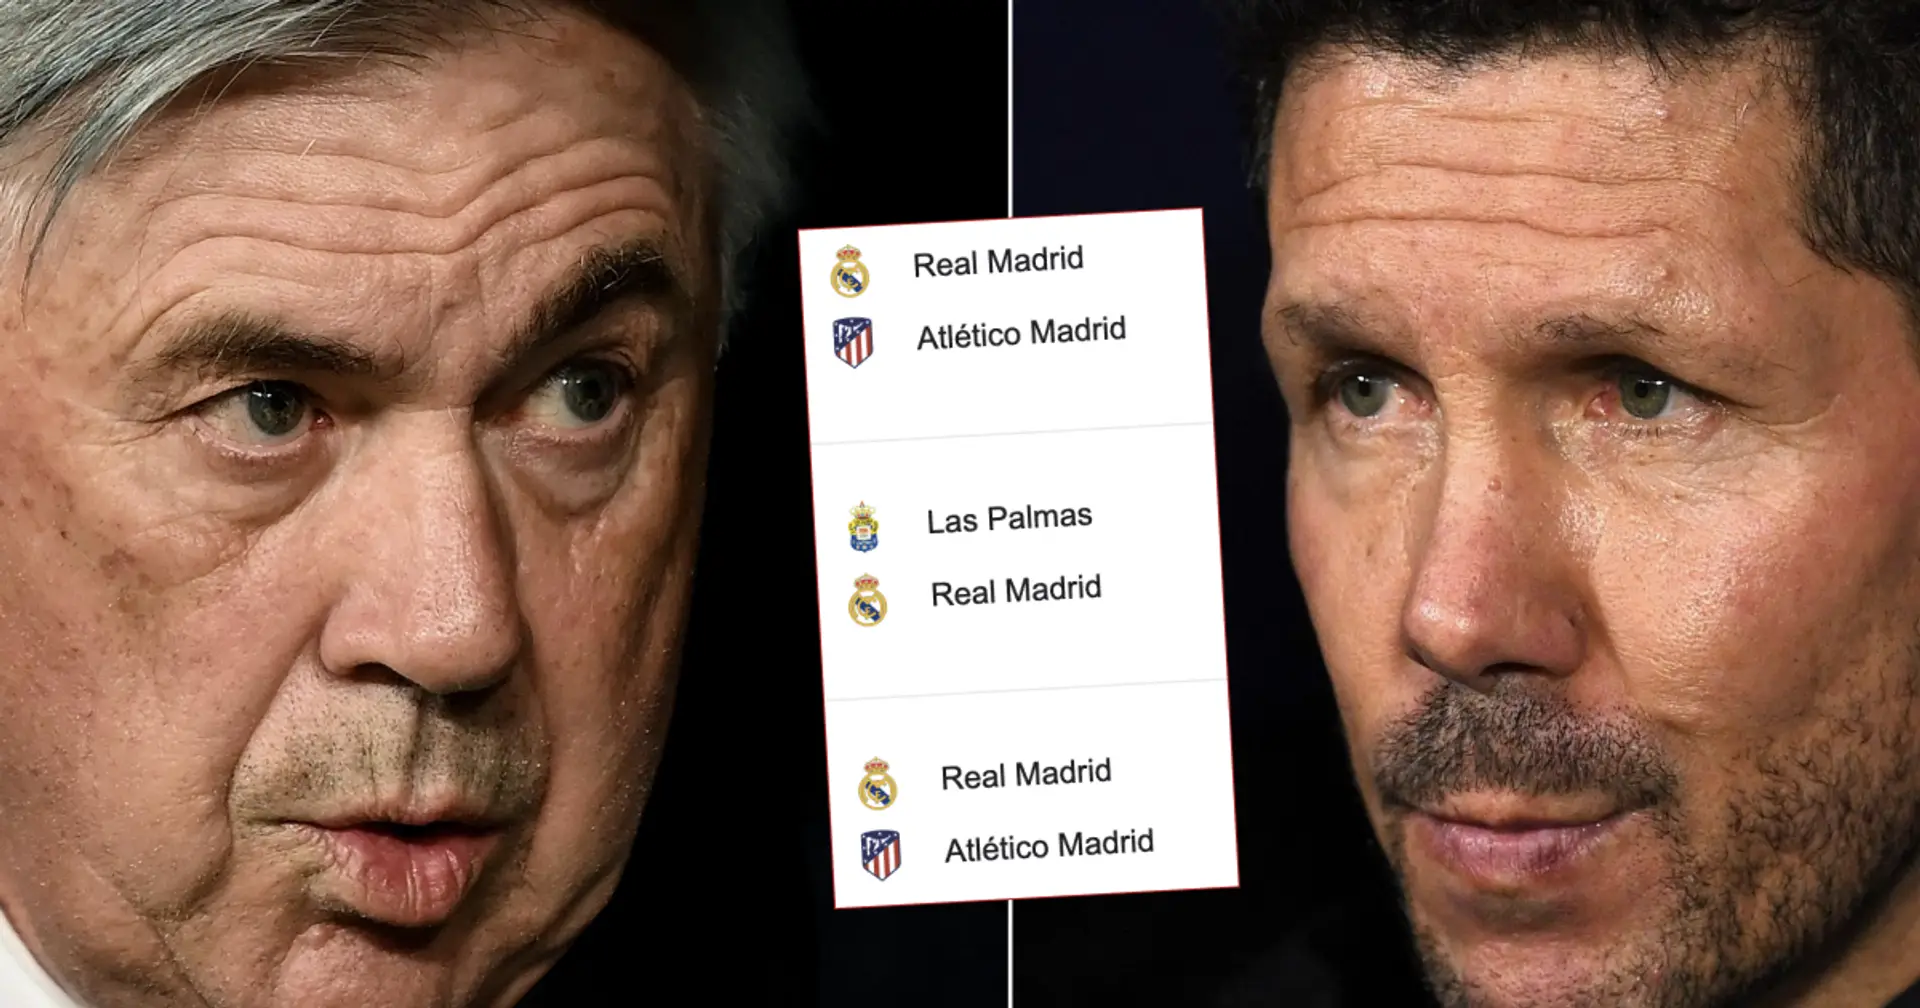 THREE Atletico clashes within one month: Real Madrid's next 11 fixtures